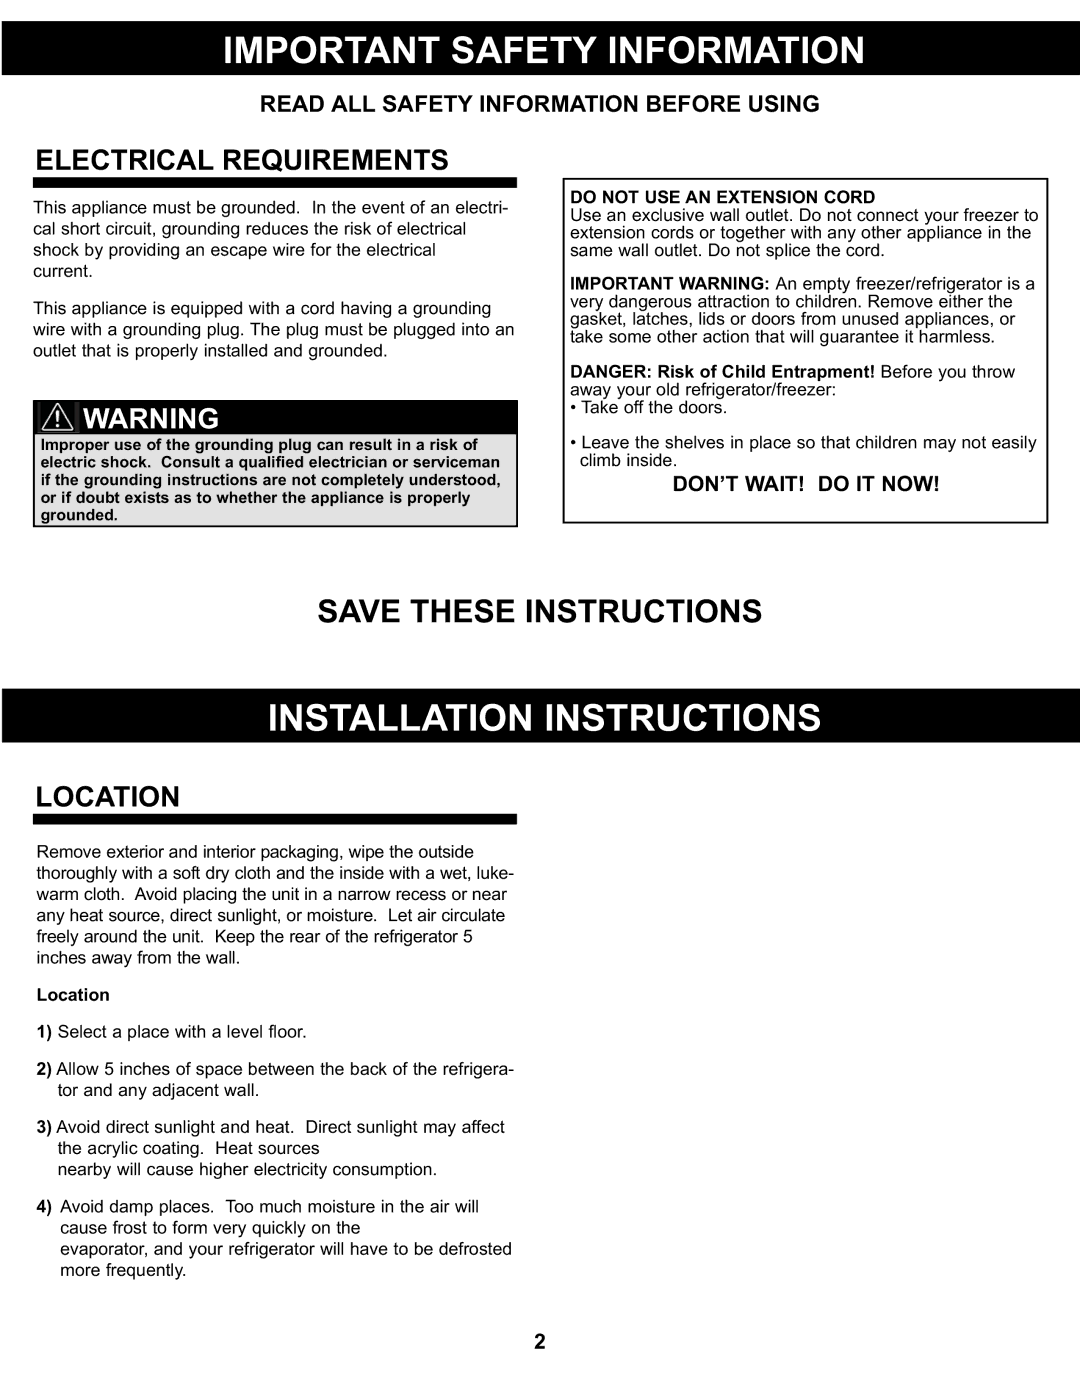 Danby DCR88BLDD, DCR88WDD manual Important Safety Information, Installation Instructions, Electrical Requirements, Location 